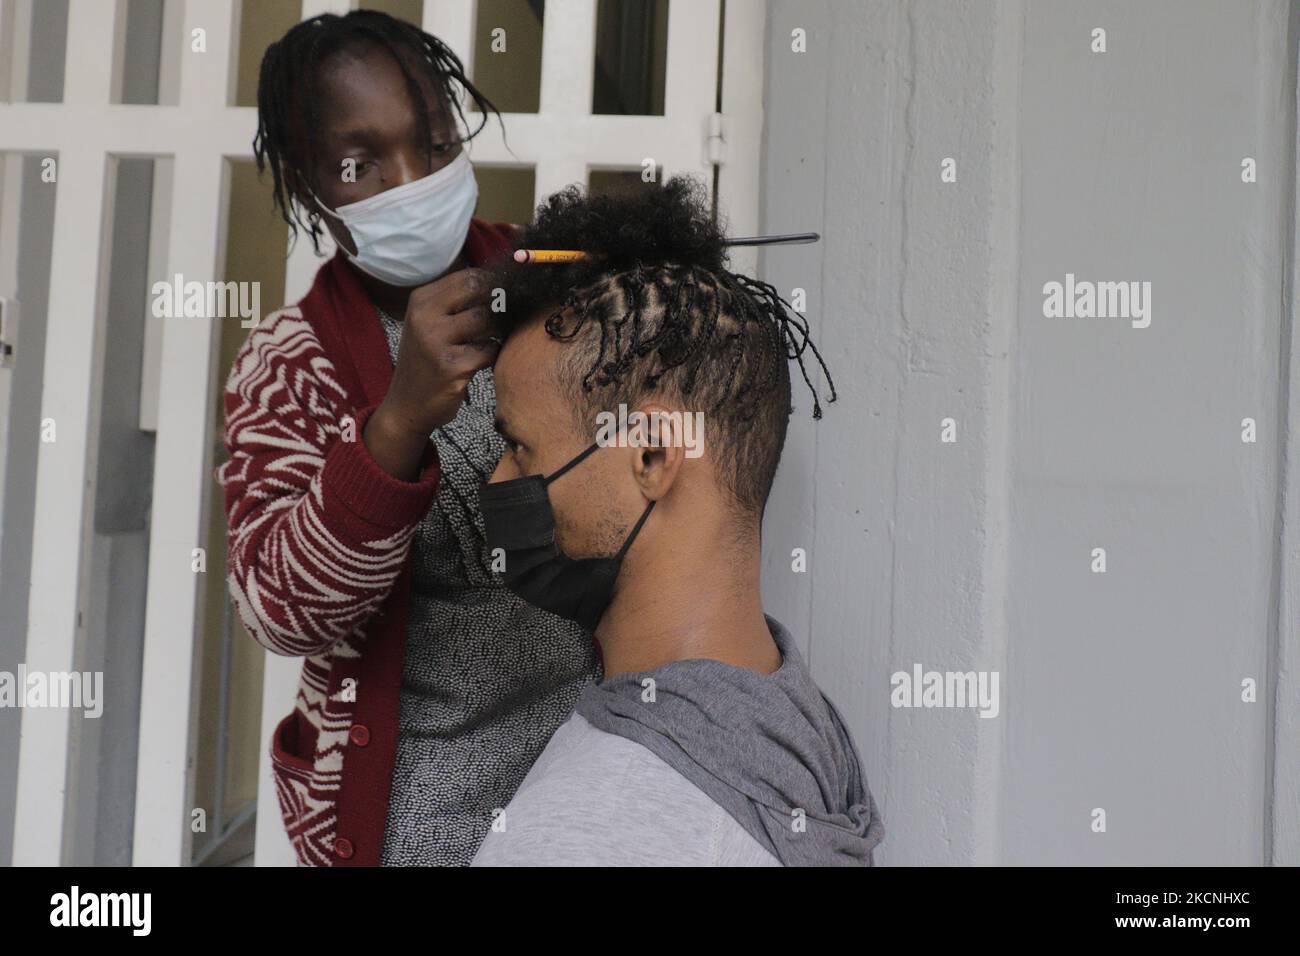 A Haitian migrant woman moulds a young man's hair inside the Casa de Acogida Formación y Empoderamiento de la Mujer Migrante y Refugiada (CAFEMIN), located in Mexico City, Mexico, on September 27, 2021, which offers accommodation and food to migrants who recently went to various refugee support offices to try to obtain a permit to stay longer in Mexico in view of the difficulties their compatriots are having in entering the United States during the COVID-19 health emergency. (Photo by Gerardo Vieyra/NurPhoto) Stock Photo